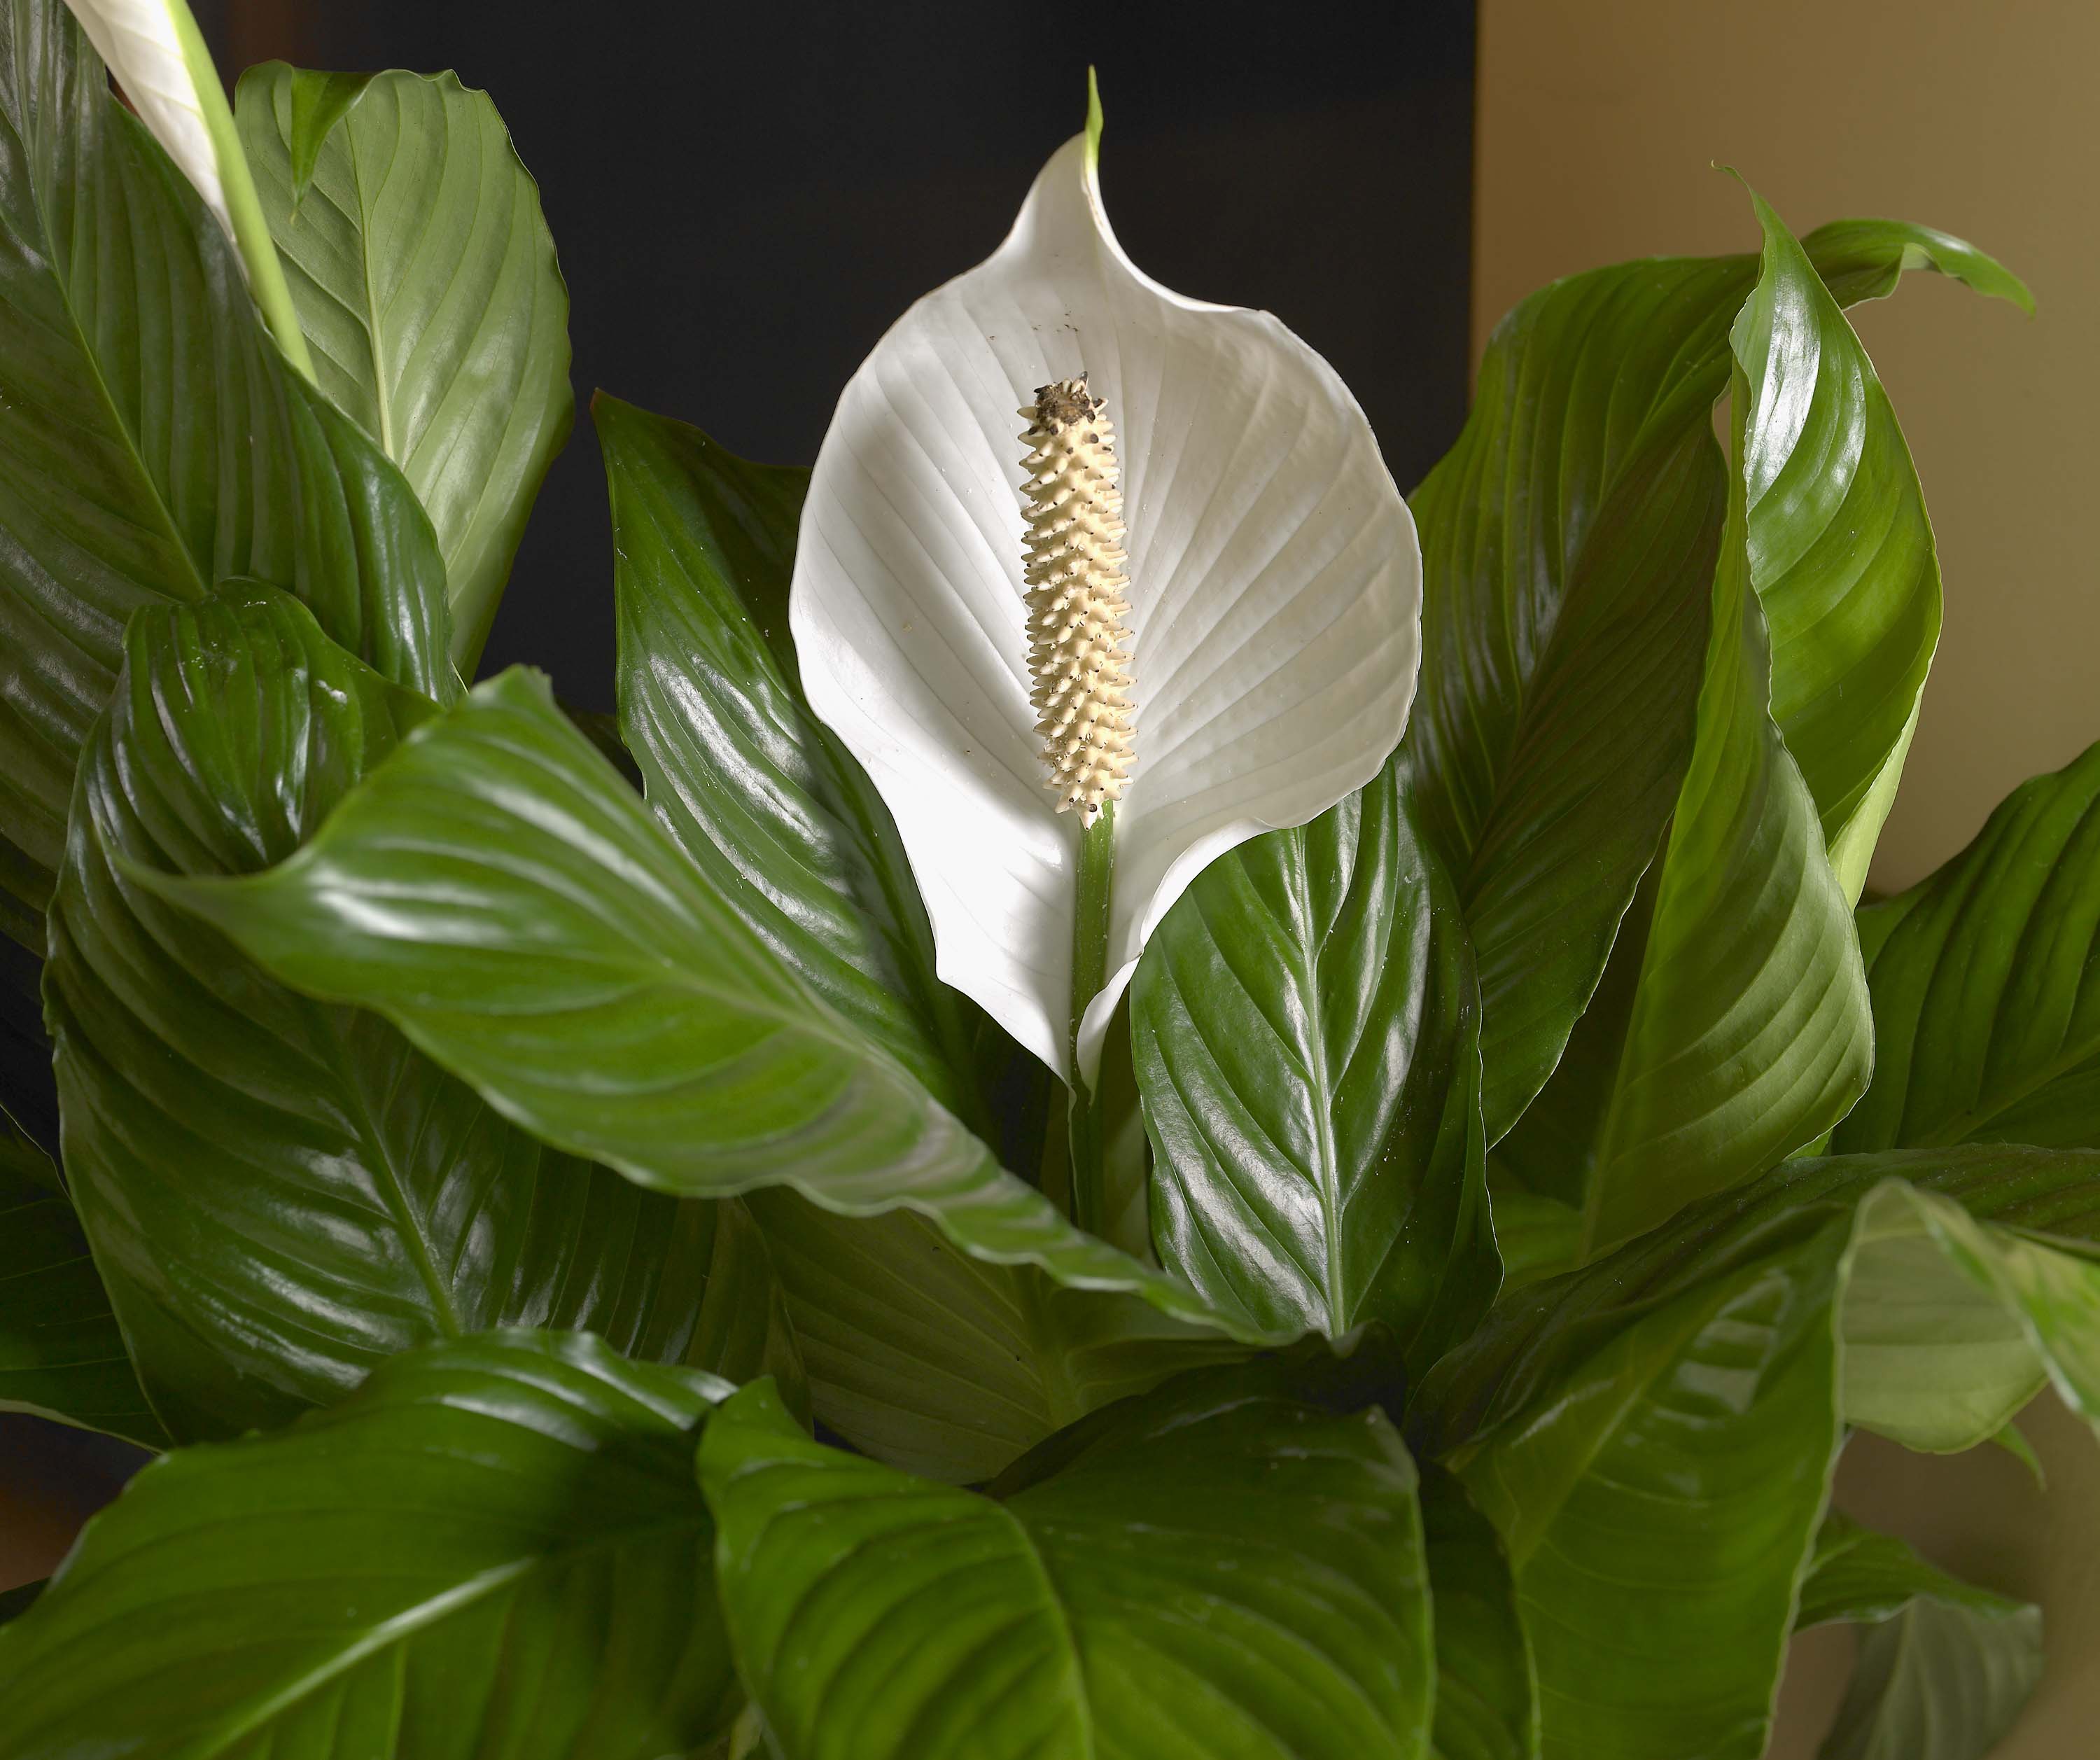 Peace lily is a common houseplant that bears broad, dark green leaves and charming, white calla-like flowers on tall stems above the foliage.